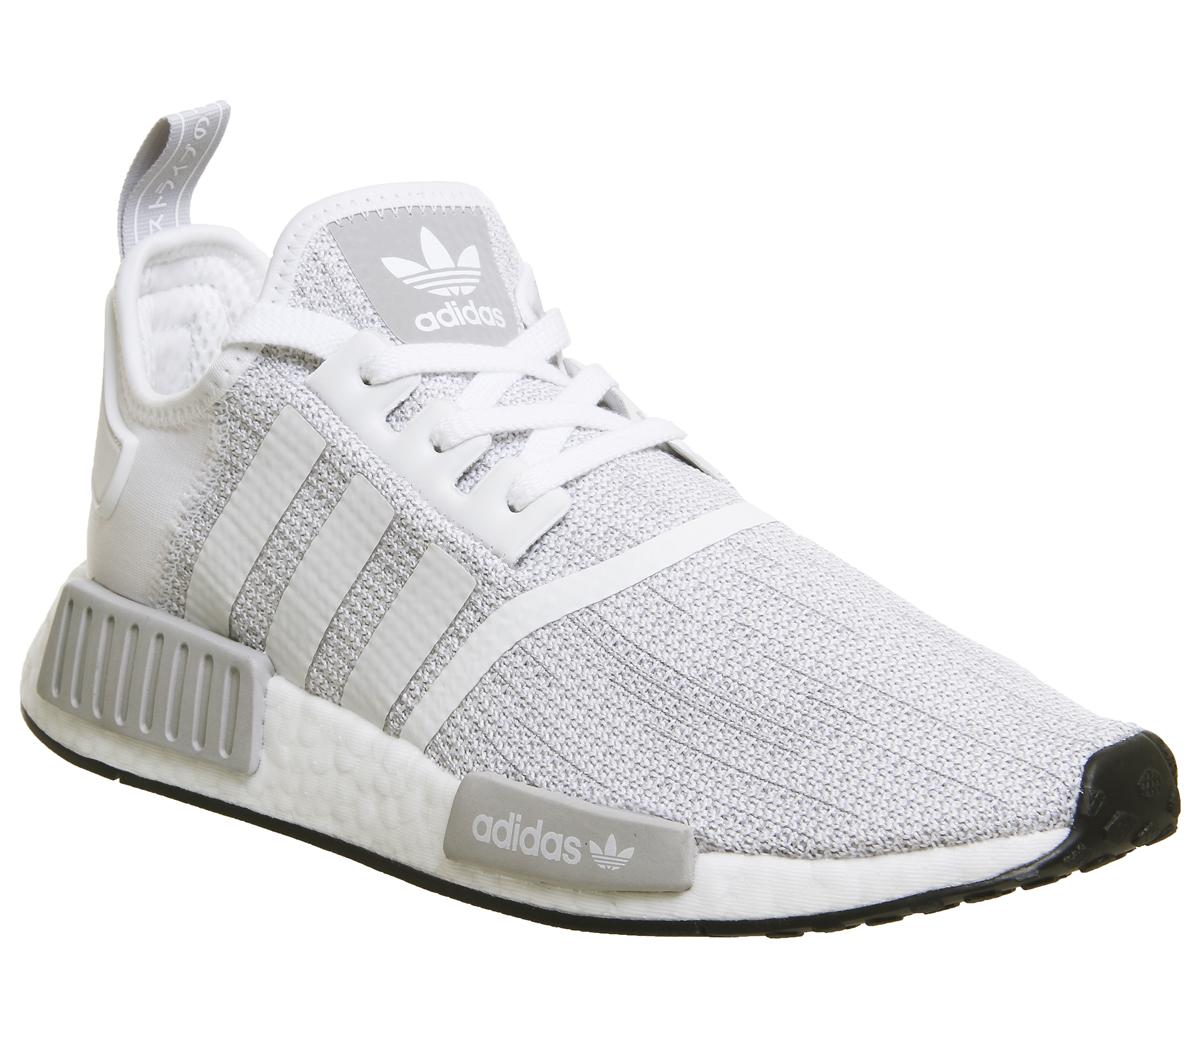 adidas Nmd R1 Trainers White Grey Core 